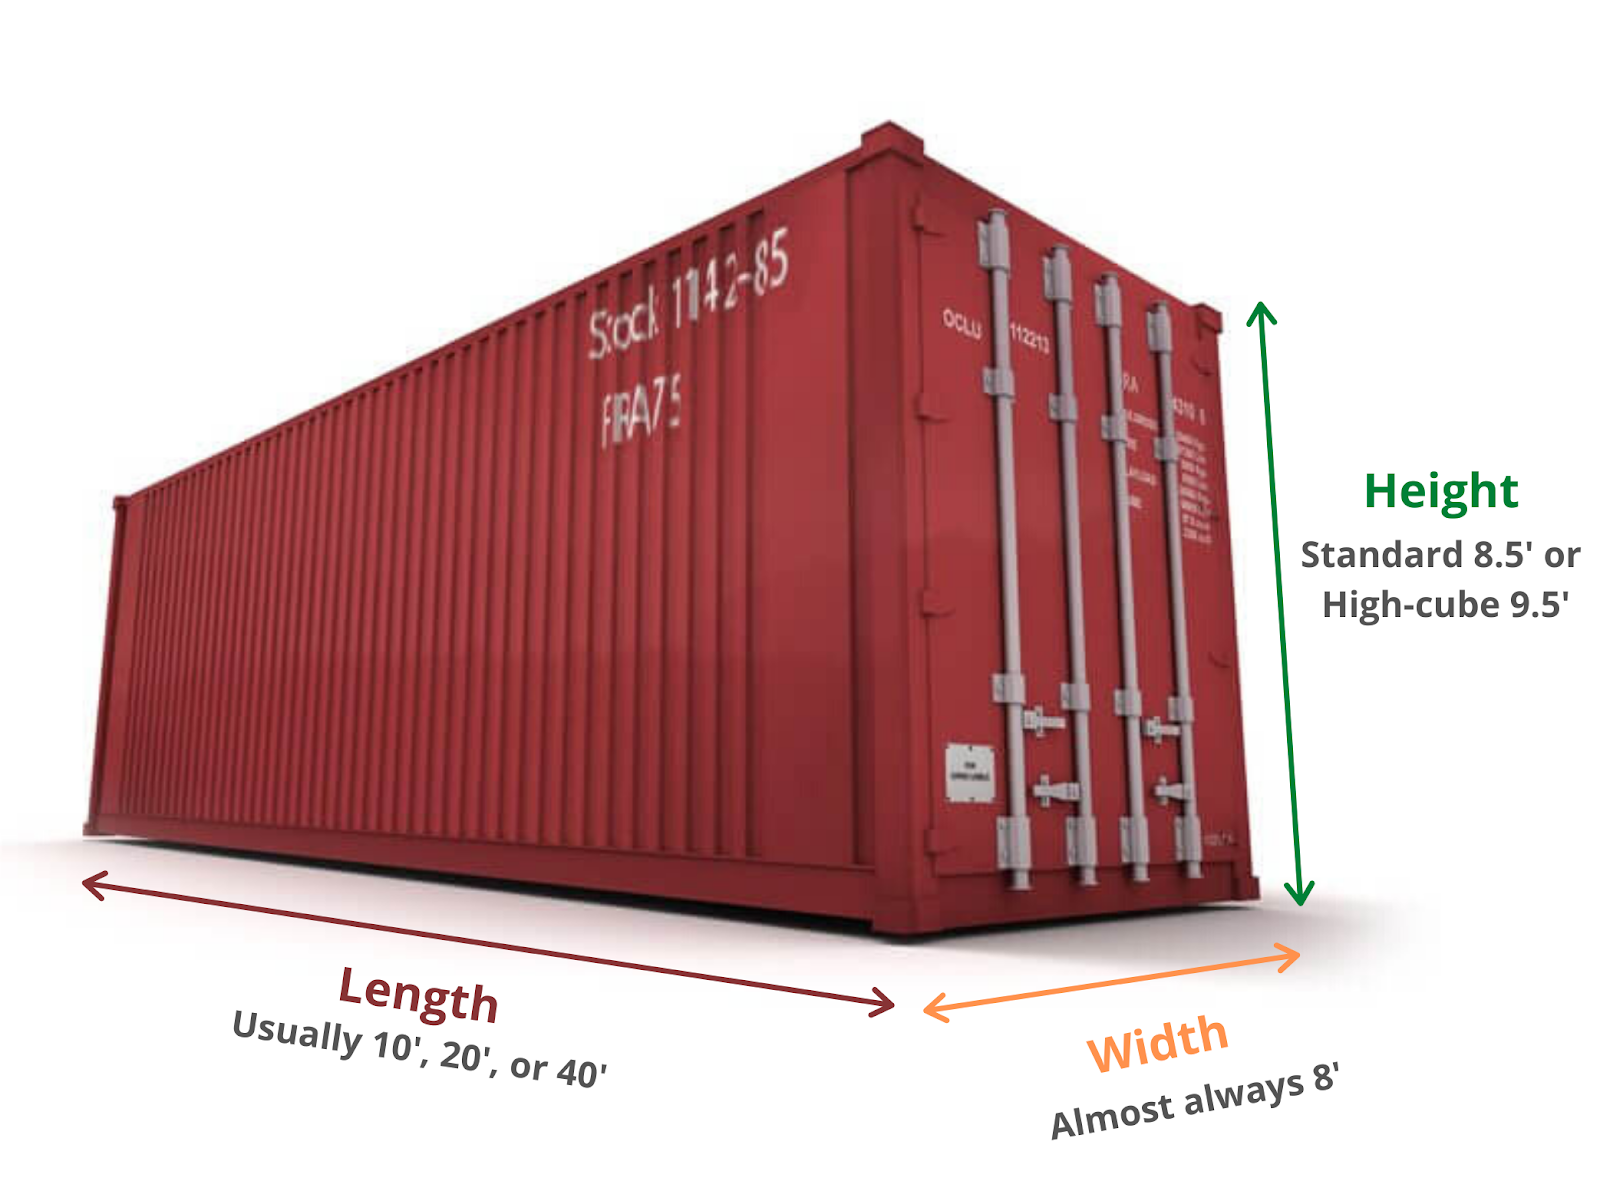 The 8 most common types of containers